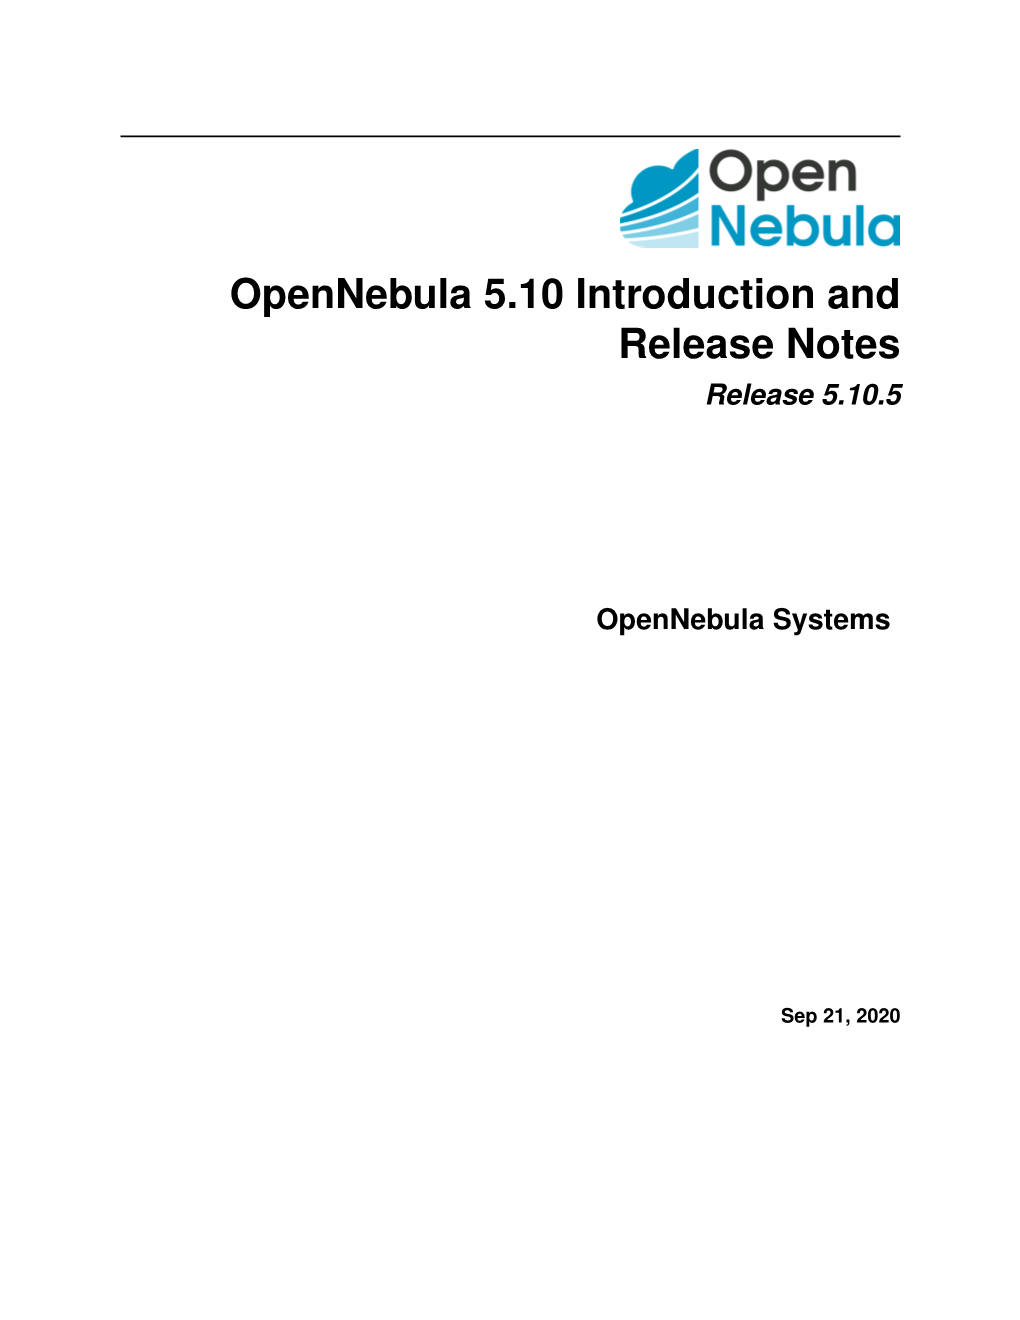 Opennebula 5.10 Introduction and Release Notes Release 5.10.5